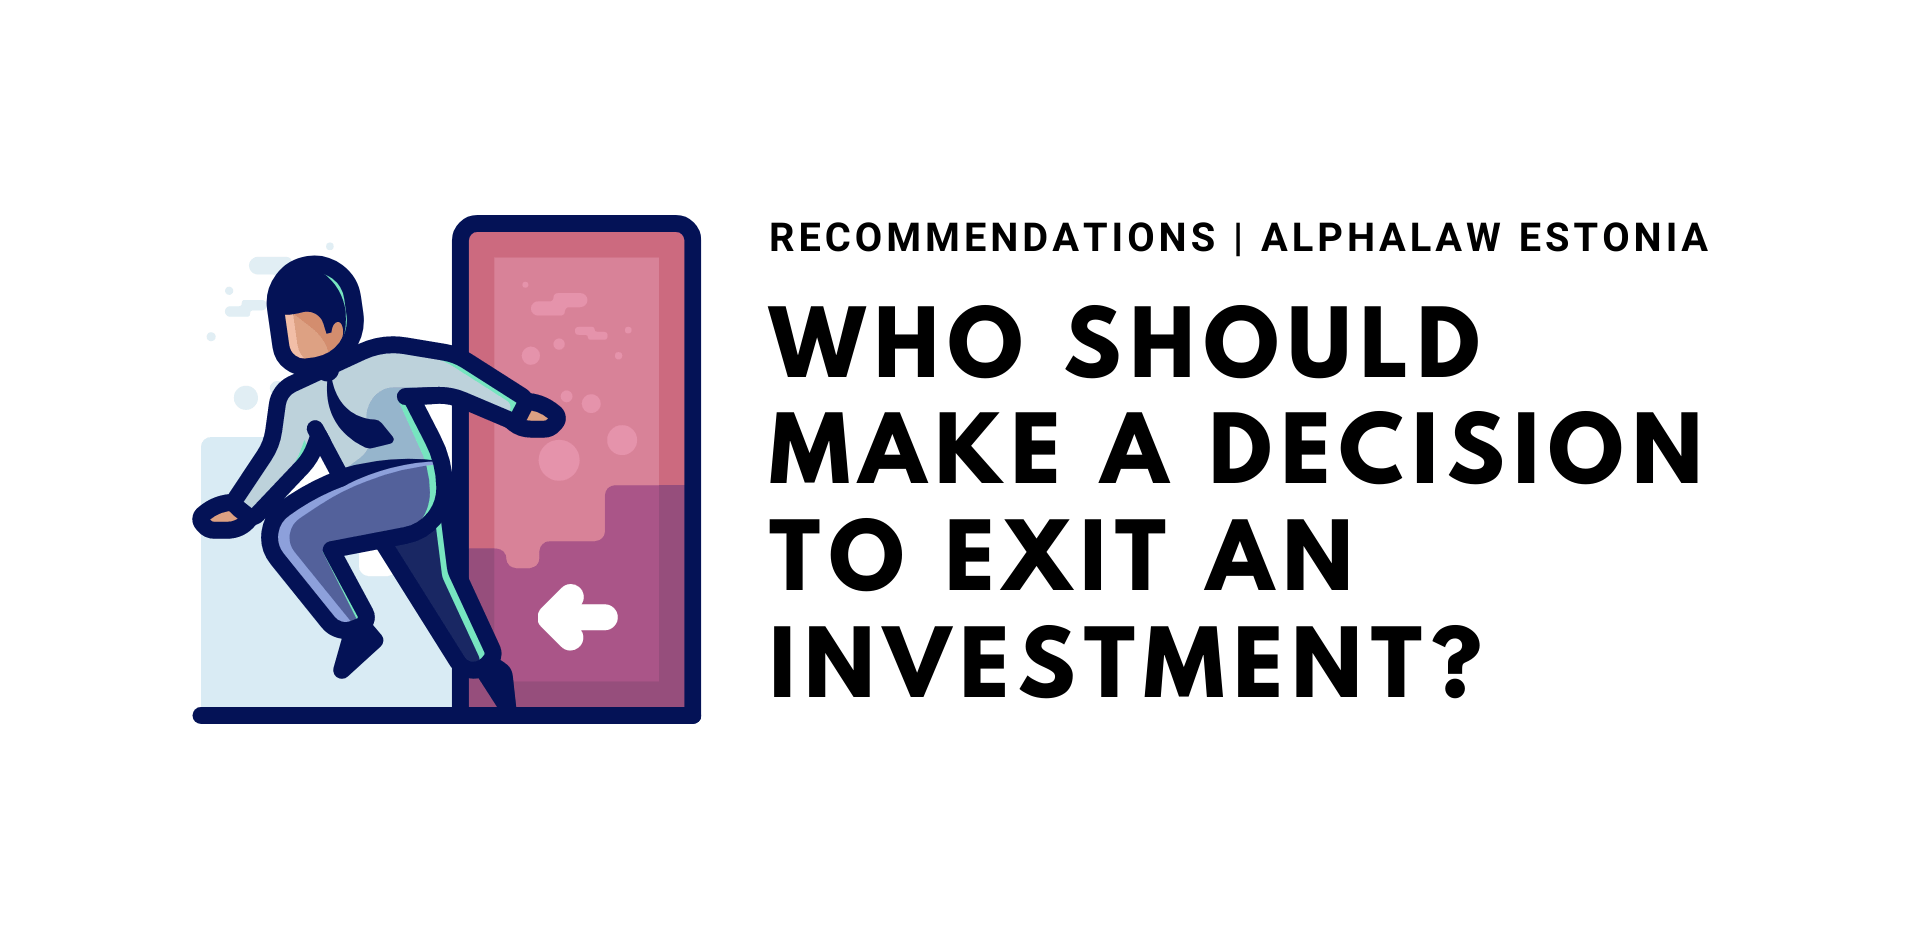 Who Should Make a Decision to Exit an Investment?